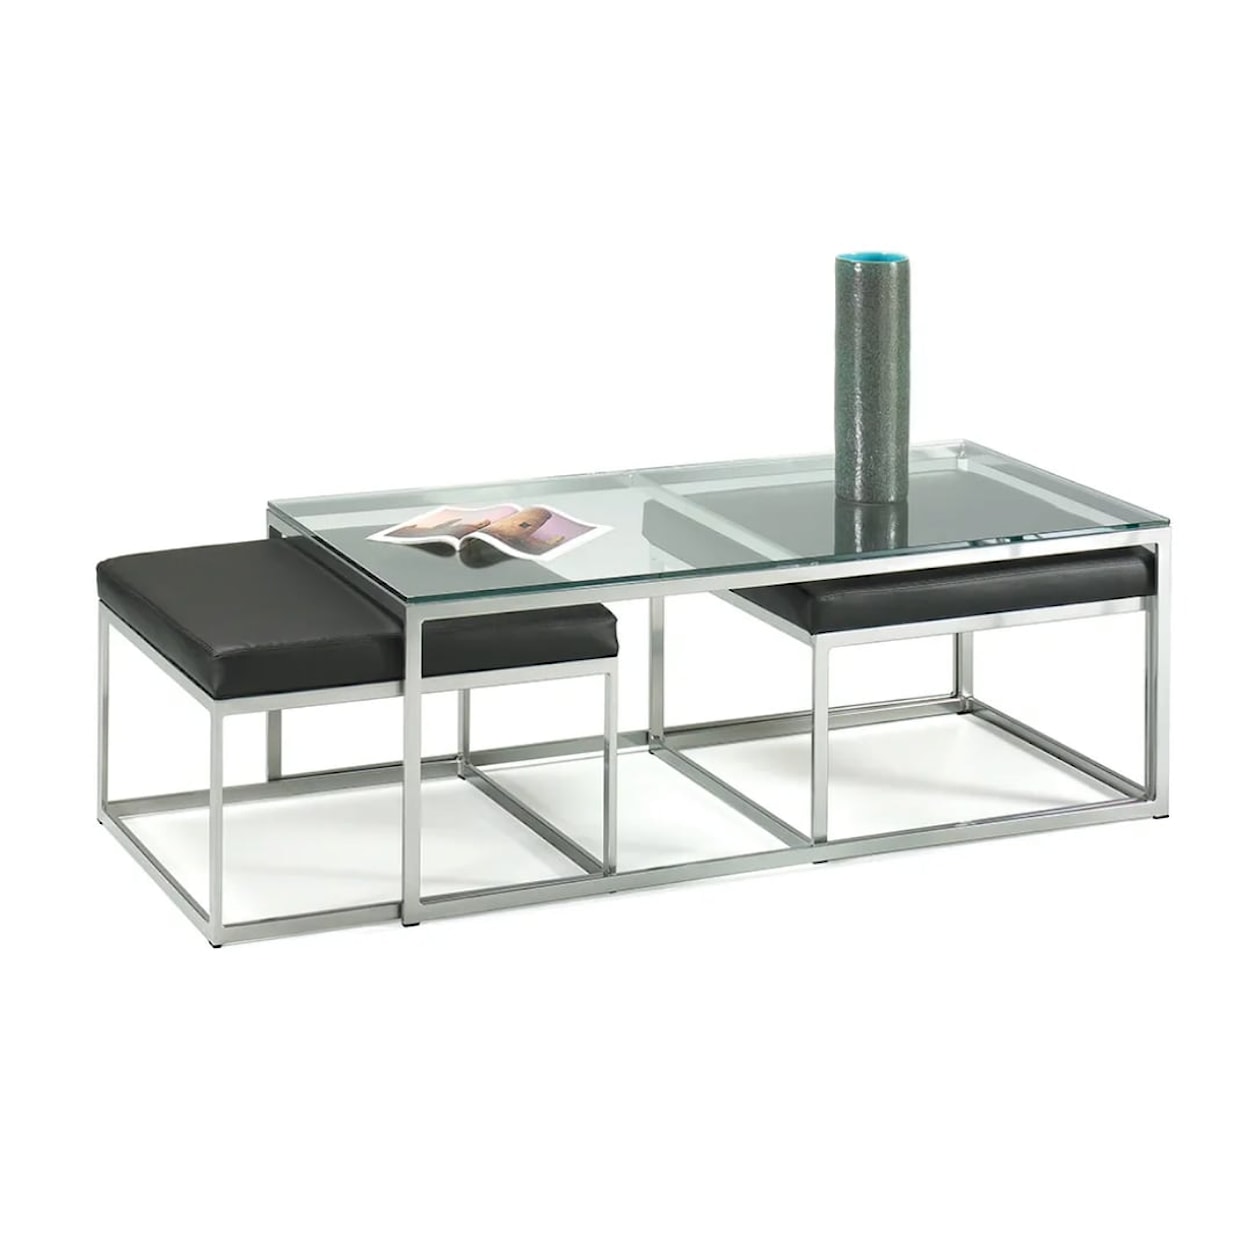 Johnston Casuals Stools and Accessories Modulus Cocktail Table